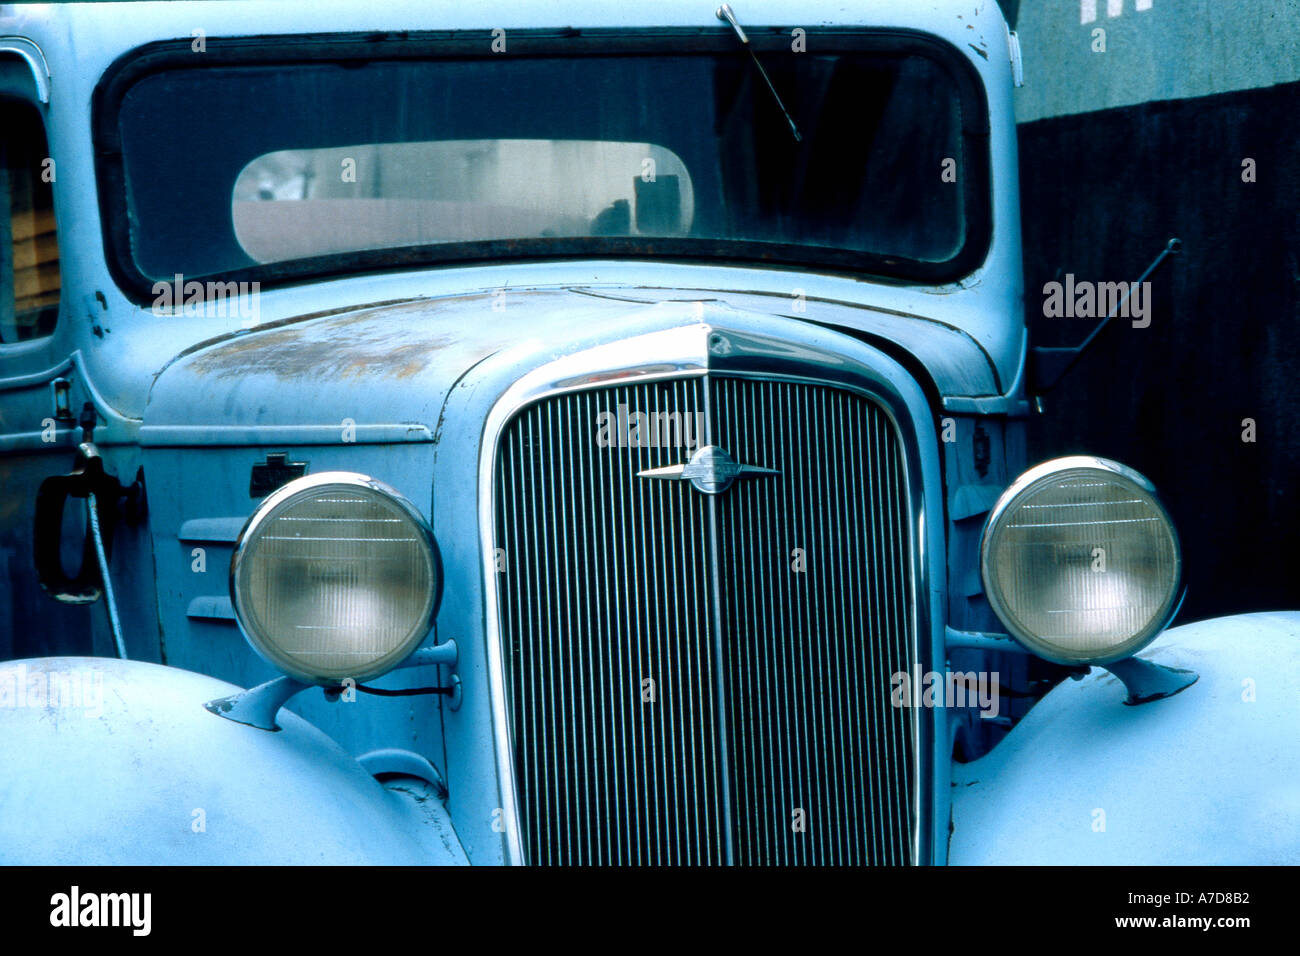 Old antique Chevrolet pickup truck Stock Photo